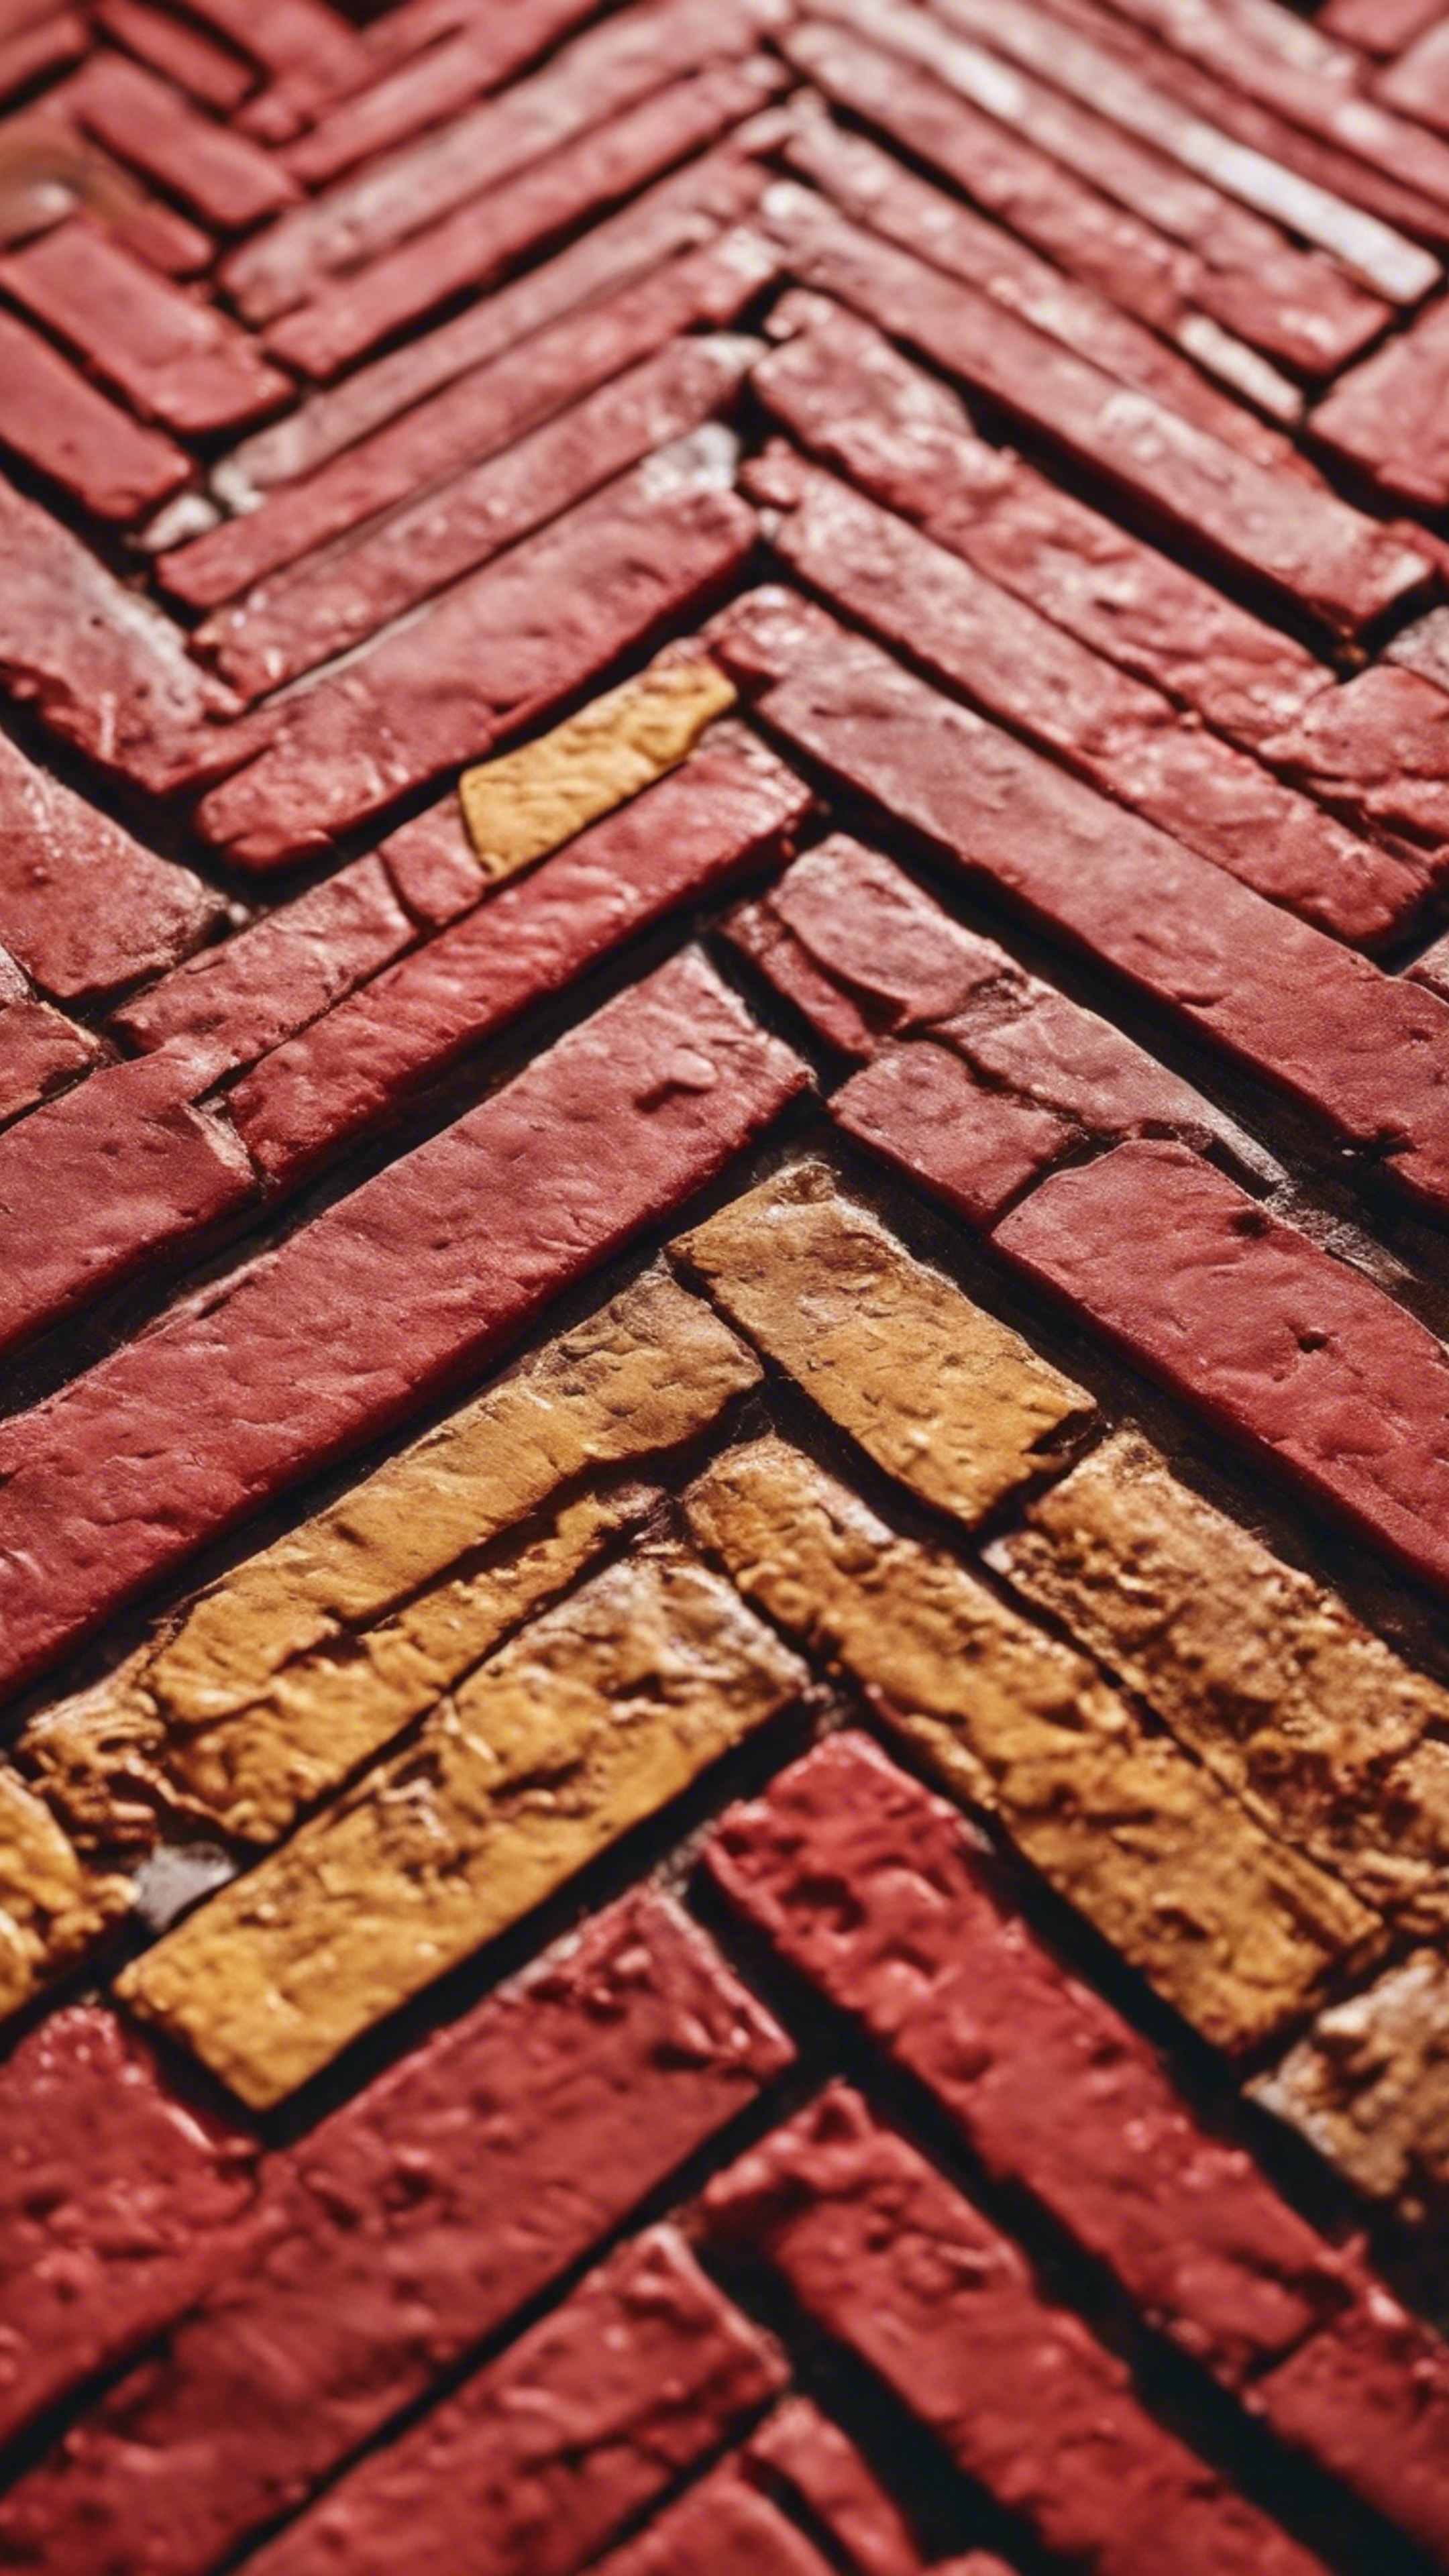 A pathway comprising a herringbone pattern using bricks in shades of red and yellow. 벽지[fb3238611eed4691b5b0]